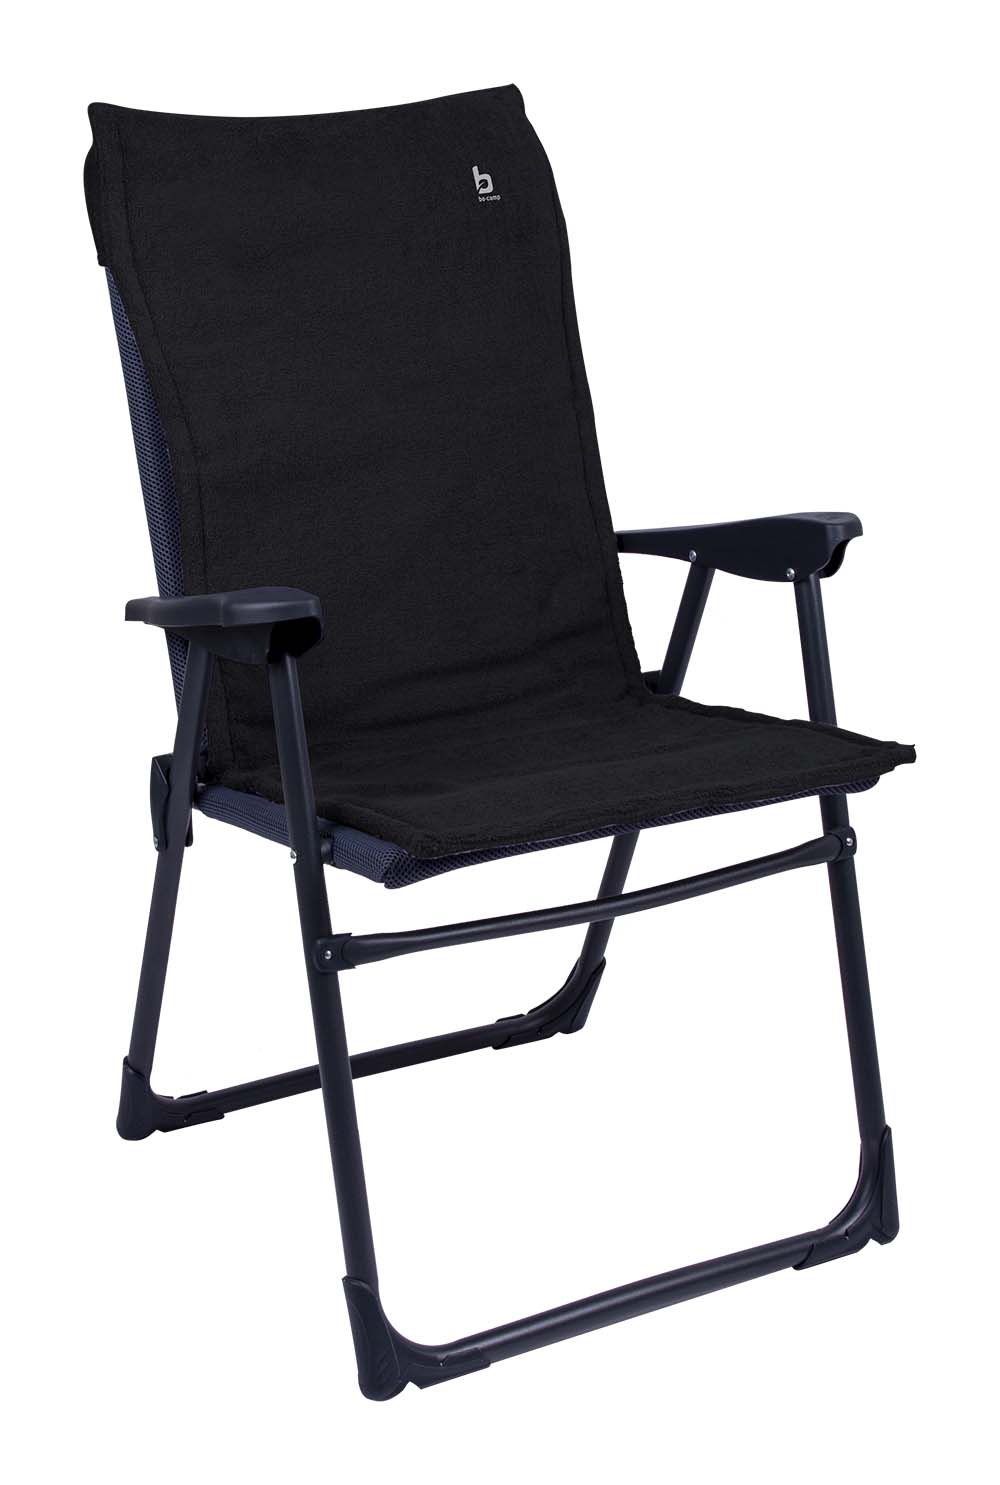 1849268 Bo-Camp - Chair cover - S - Universal - Padded terry cloth - Cotton - Anthracite